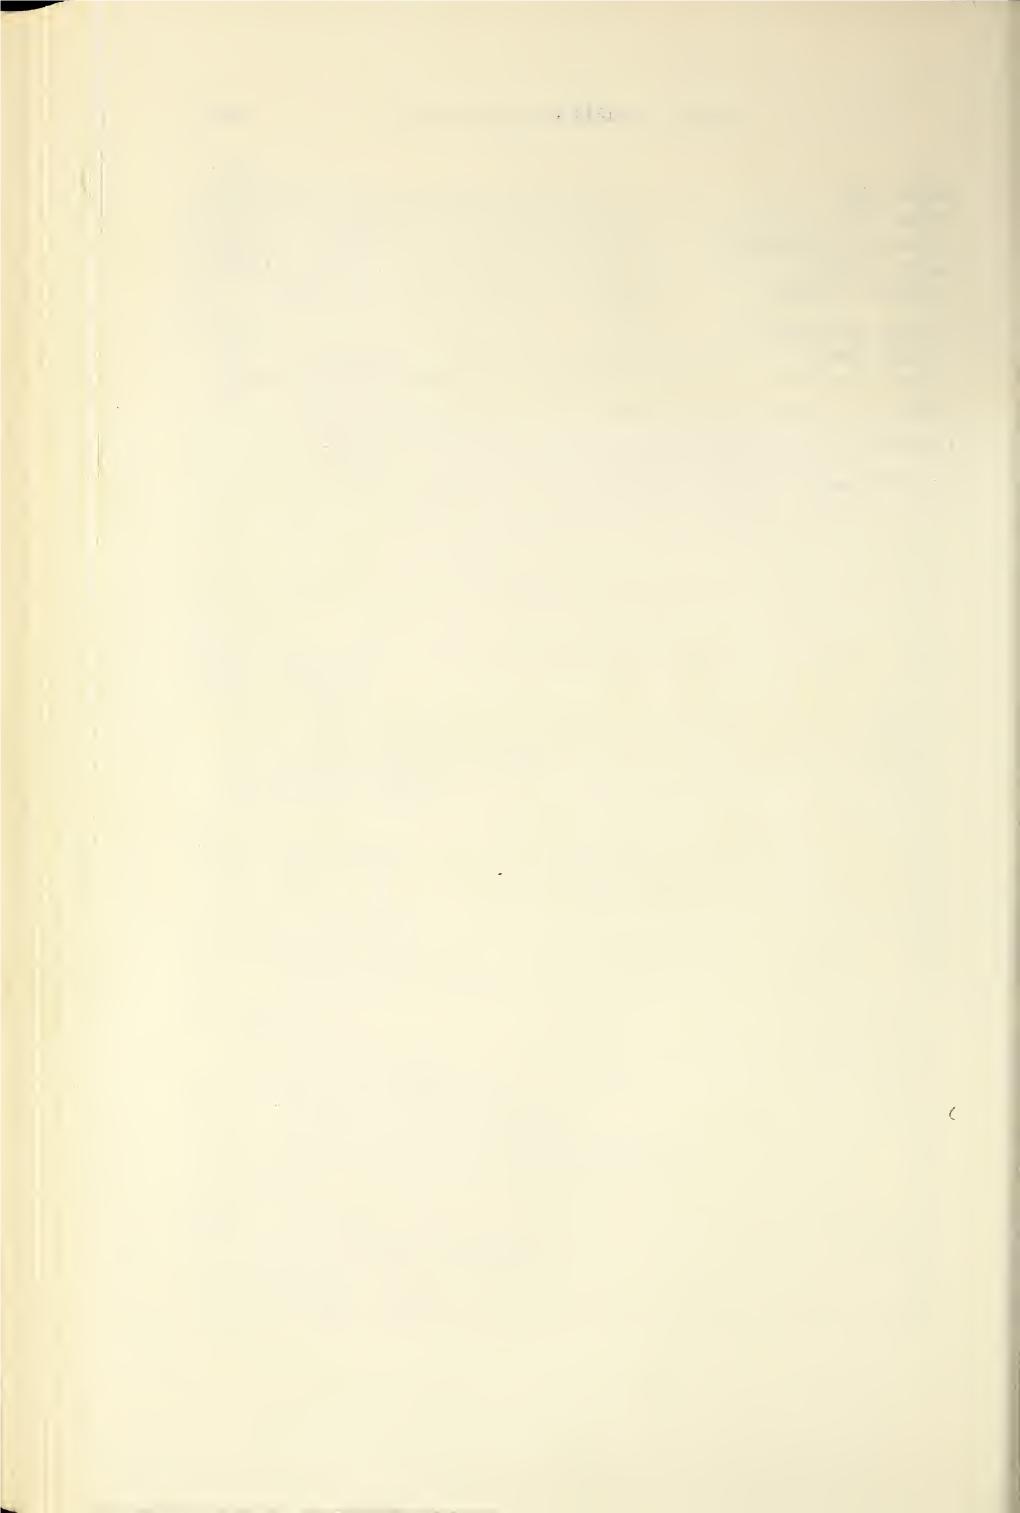 College of Arts and Sciences Catalog and Announcements, 1963-1966